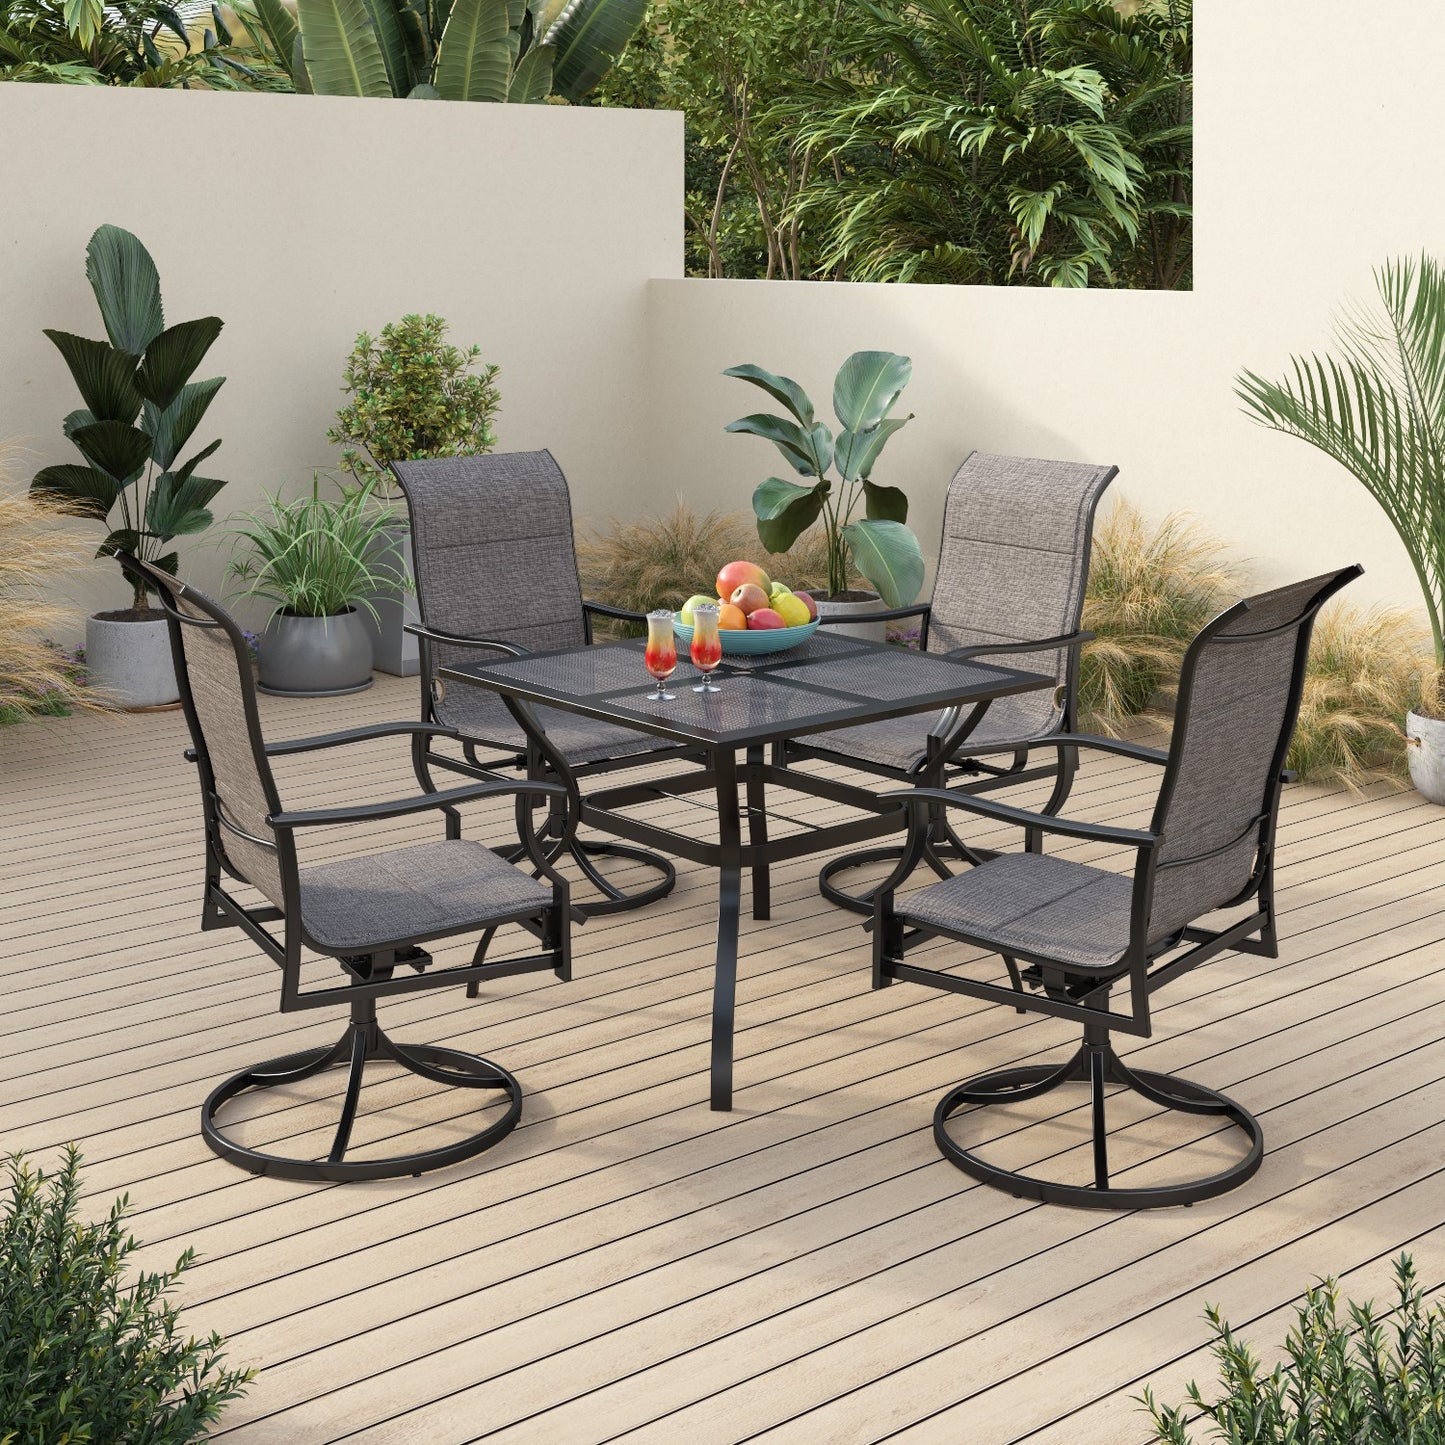 Sophia & William 5 Pieces Metal Patio Dining Set Swivel Paded Chairs and Table Set